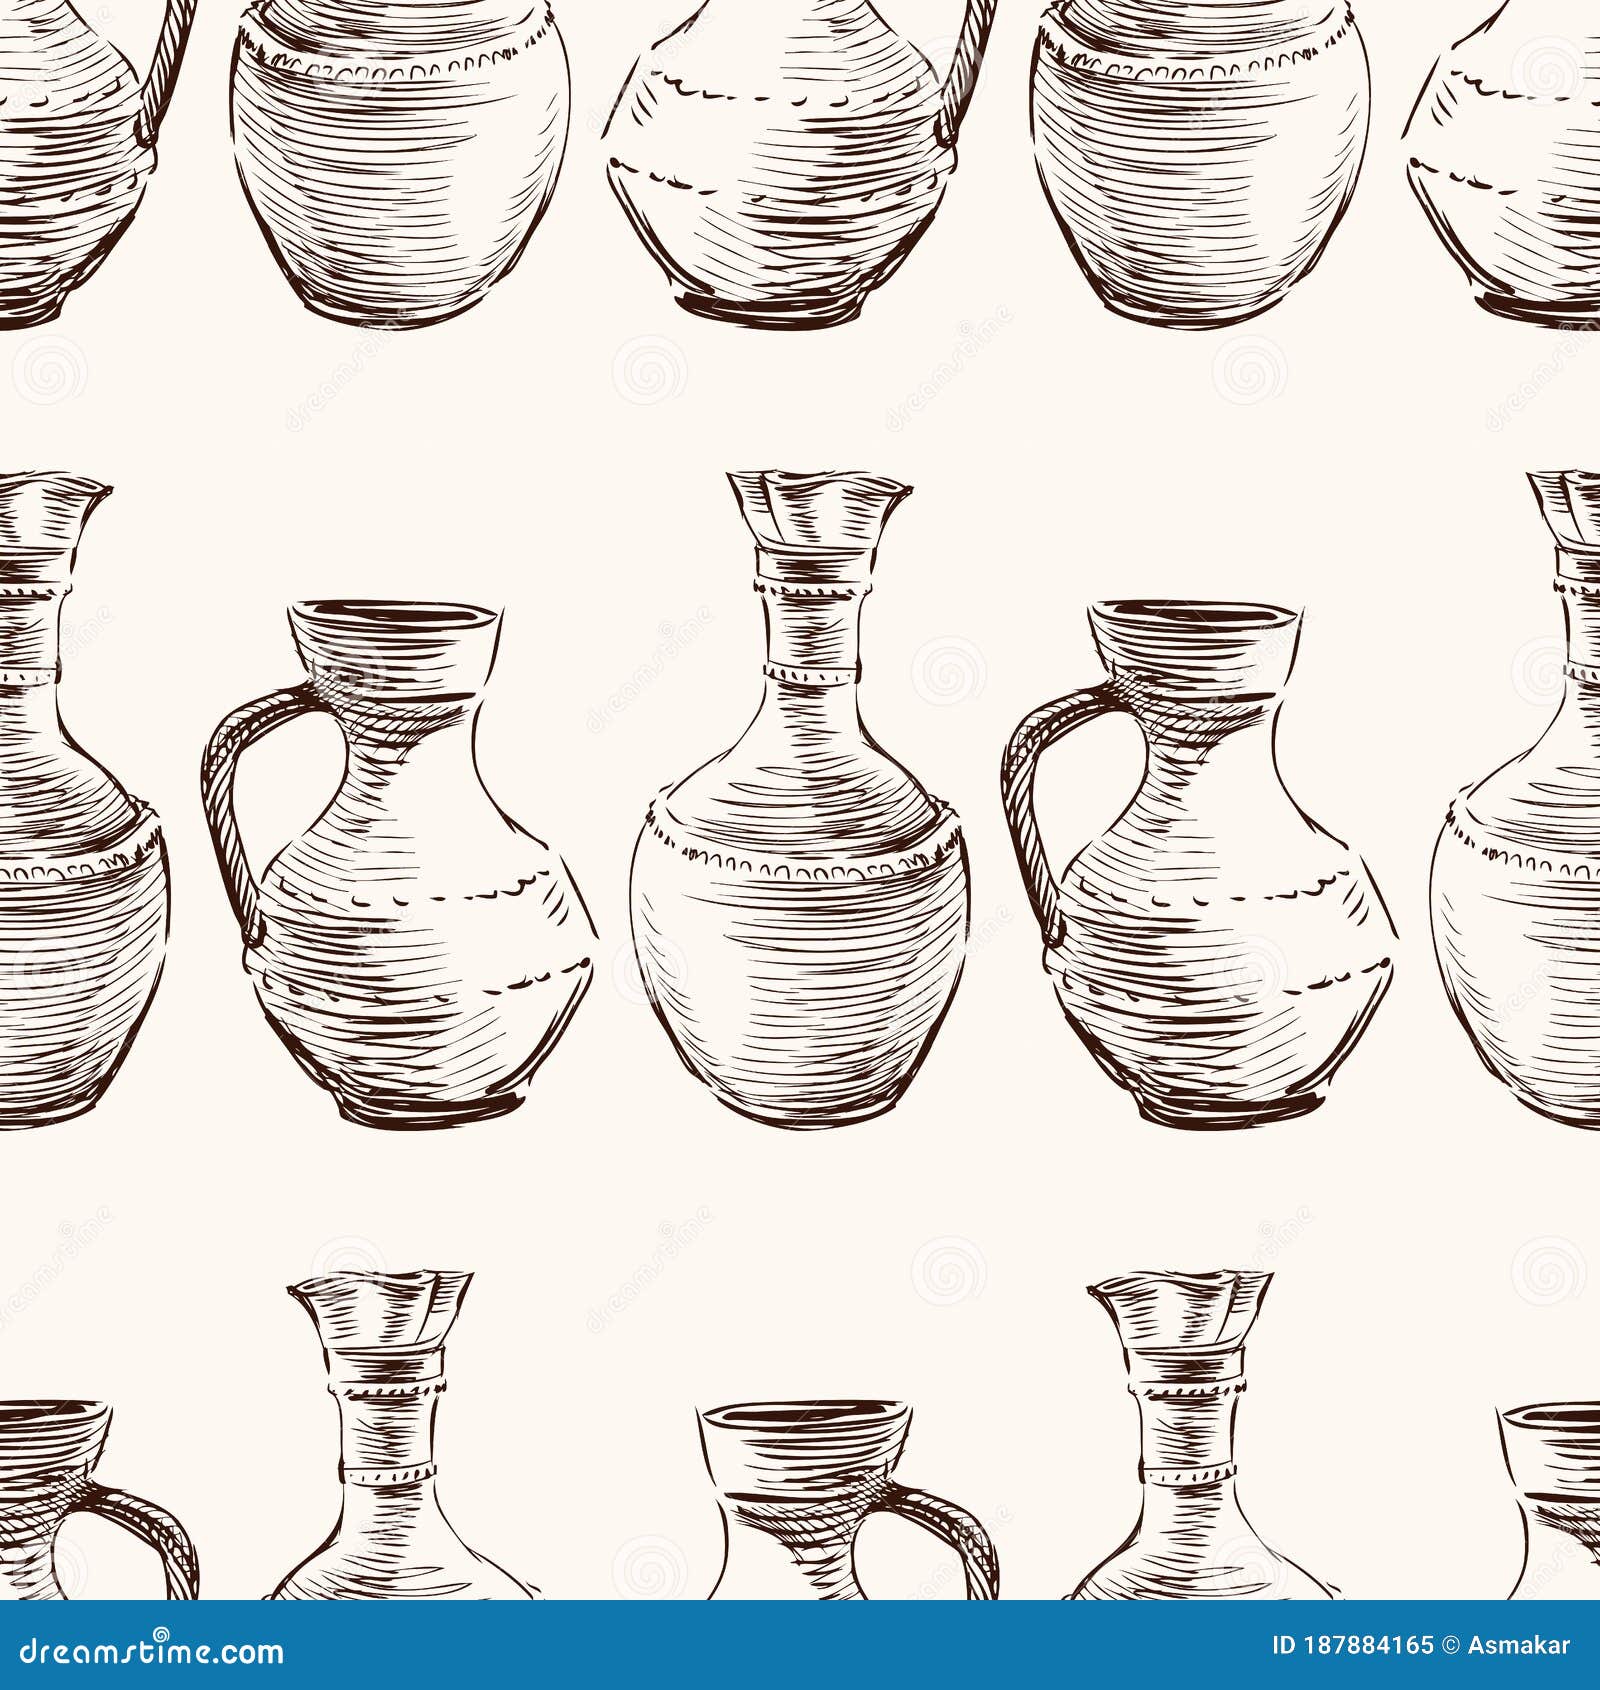 6612 Pottery Sketches Images Stock Photos  Vectors  Shutterstock